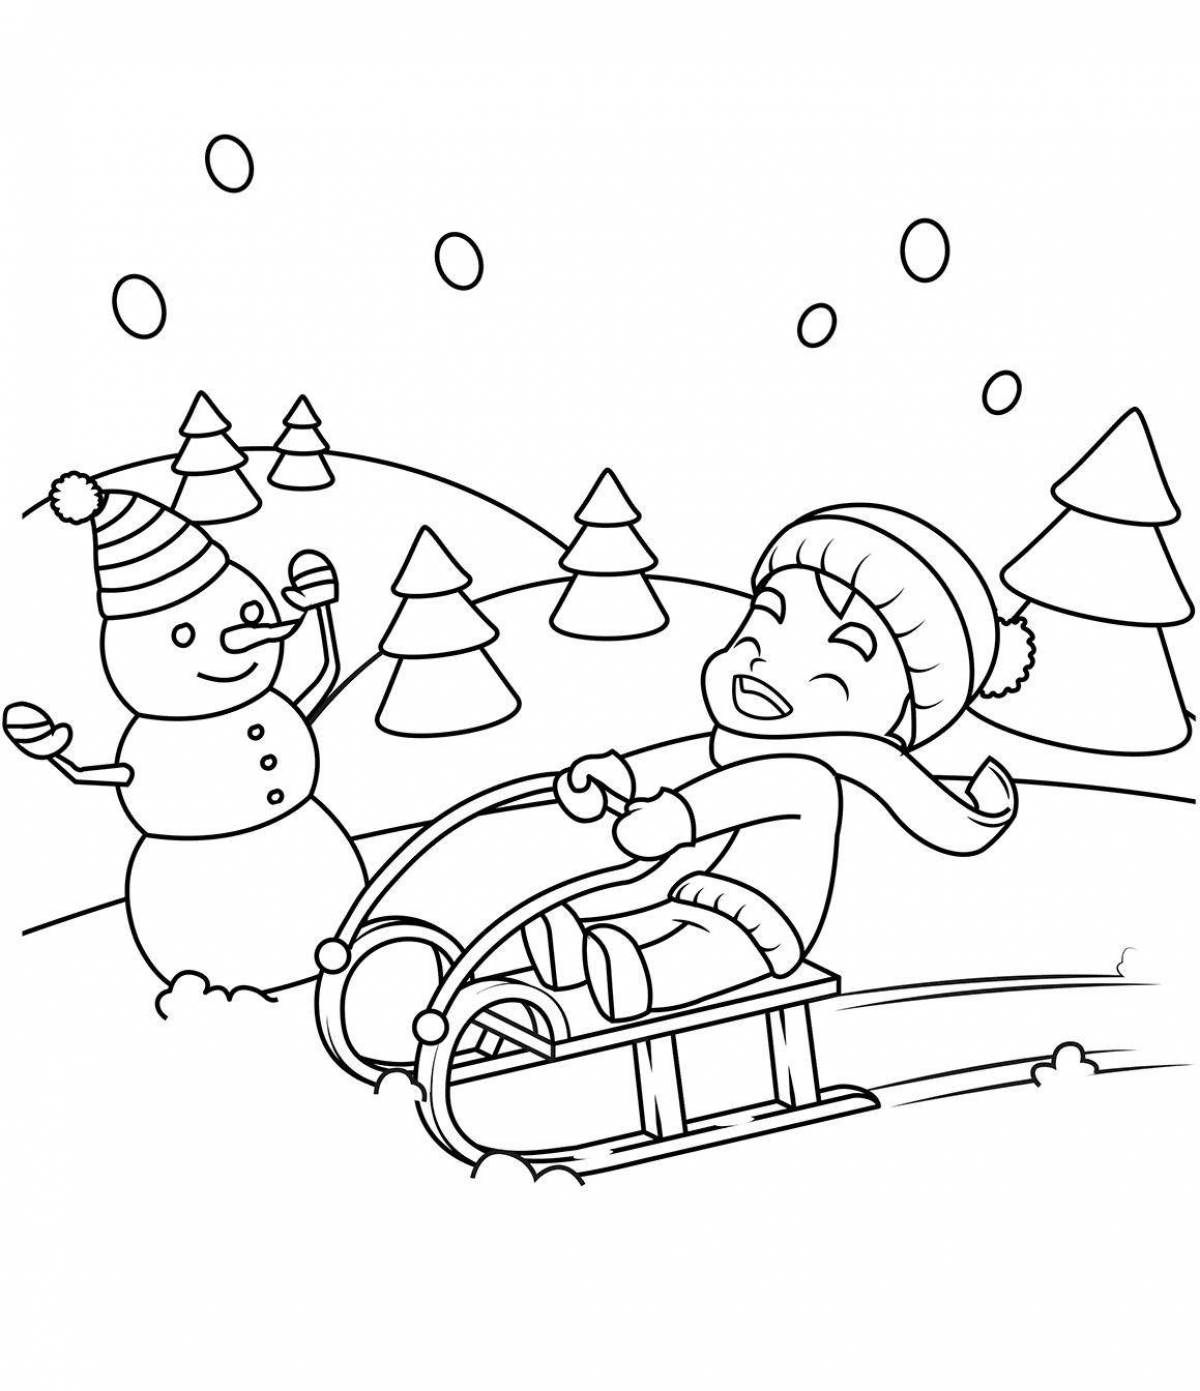 Adorable sleigh coloring book for 4-5 year olds